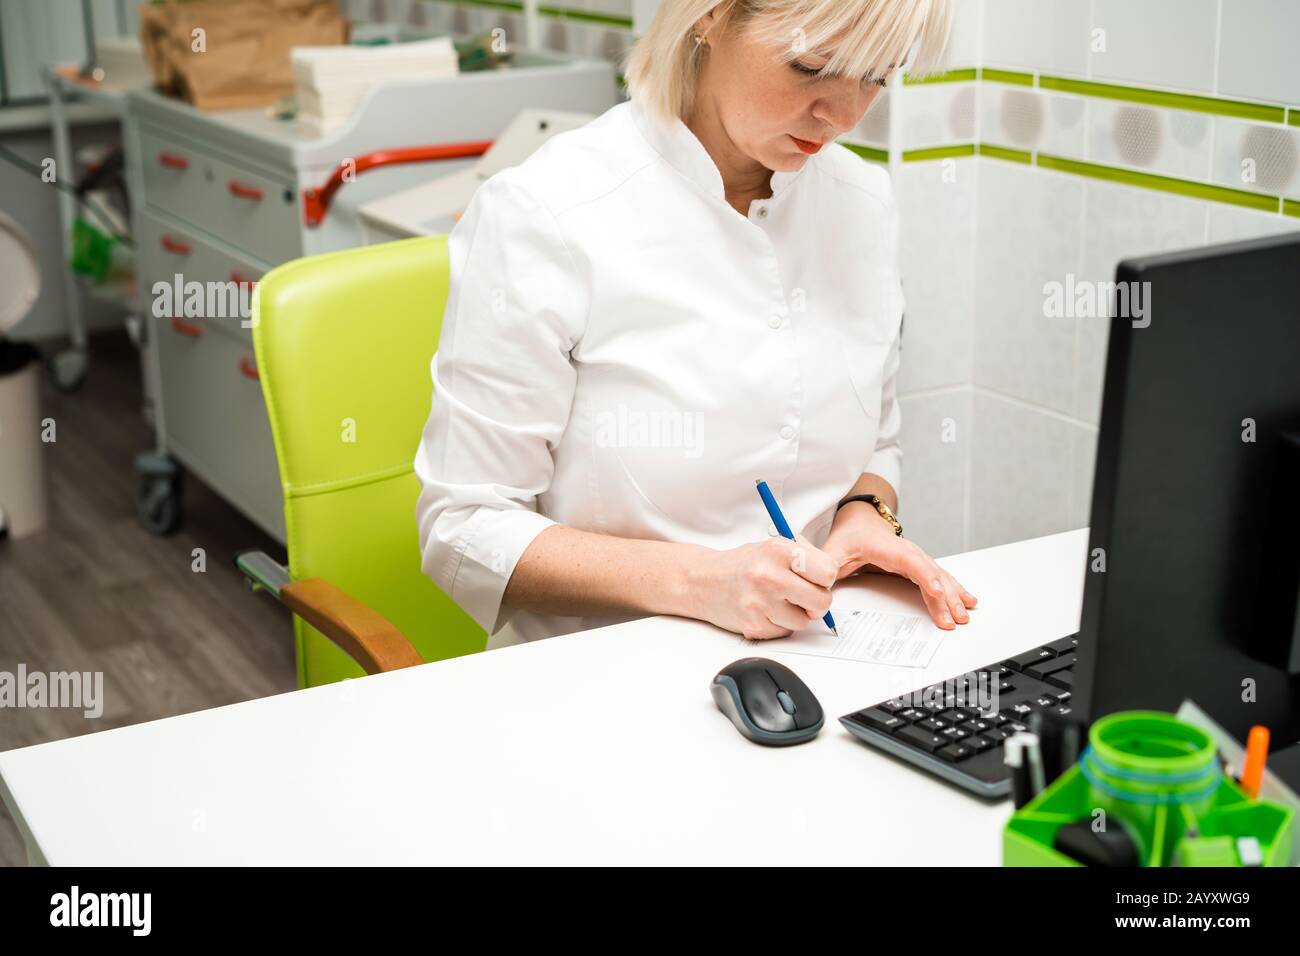 Female doctor sitting at a desk in a white medical coat  Stock Photo